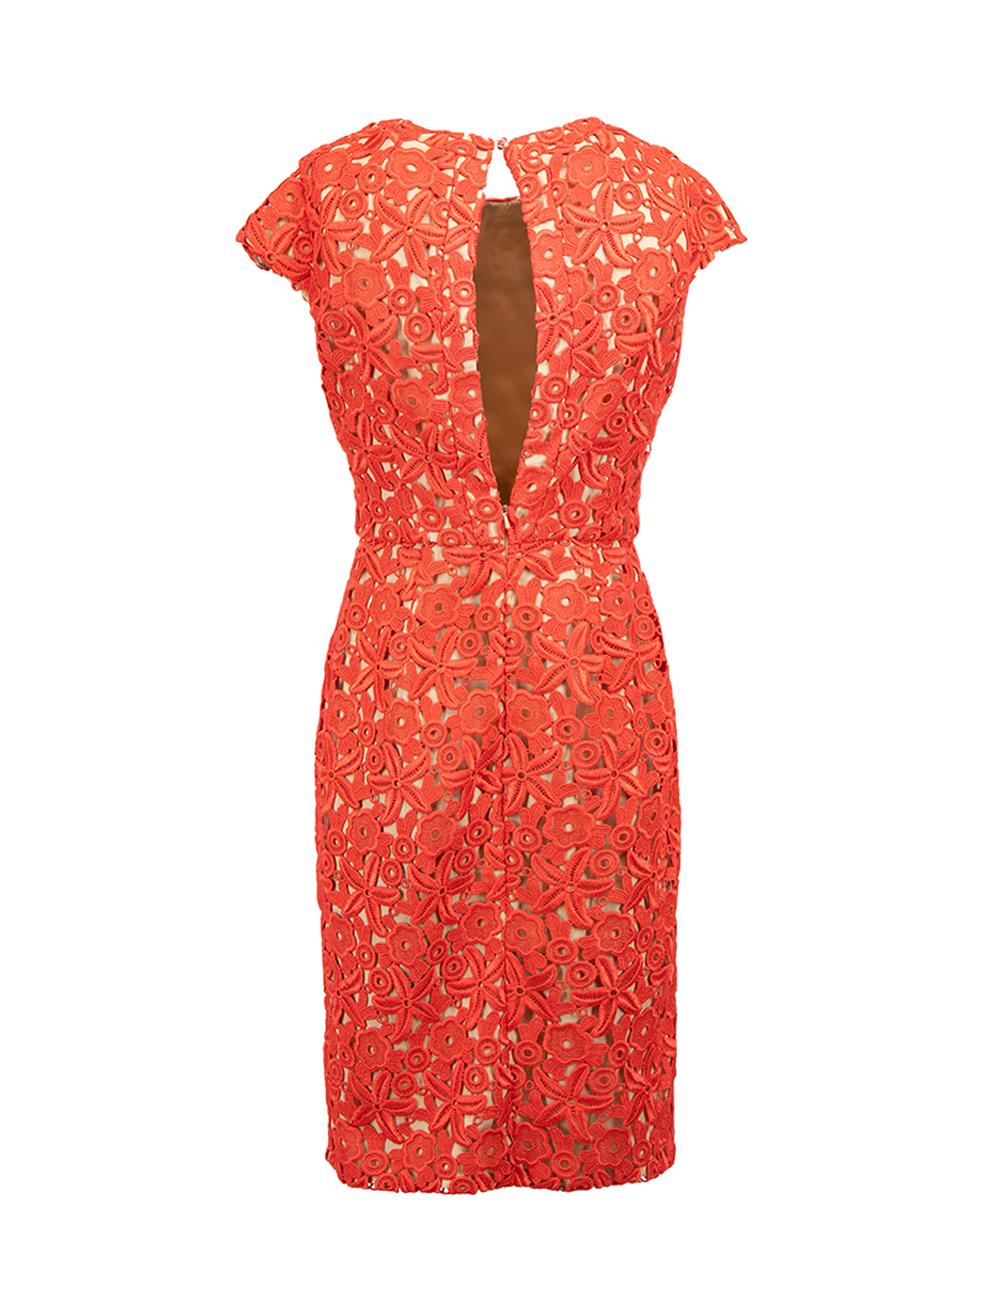 Red Floral Lace Cap Sleeve Knee Length Dress Size M In Good Condition For Sale In London, GB